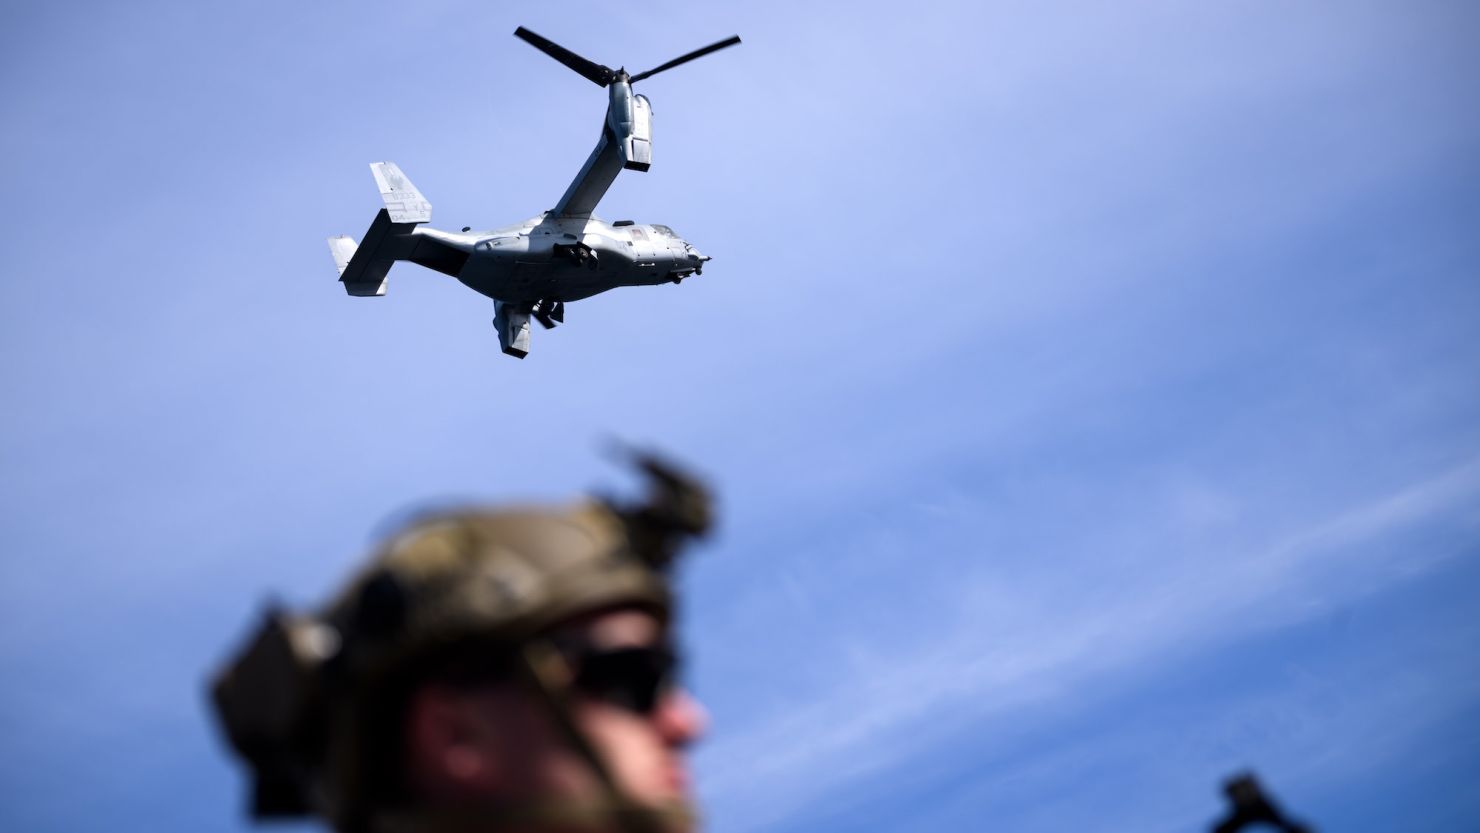 A US Navy Bell-Boeing V-22 Osprey flies over the USS Mesa Verde during the major maritime maneuver "Northern Coasts 23" in the Baltic Sea off the coast of Latvia in this 2023 file photo.